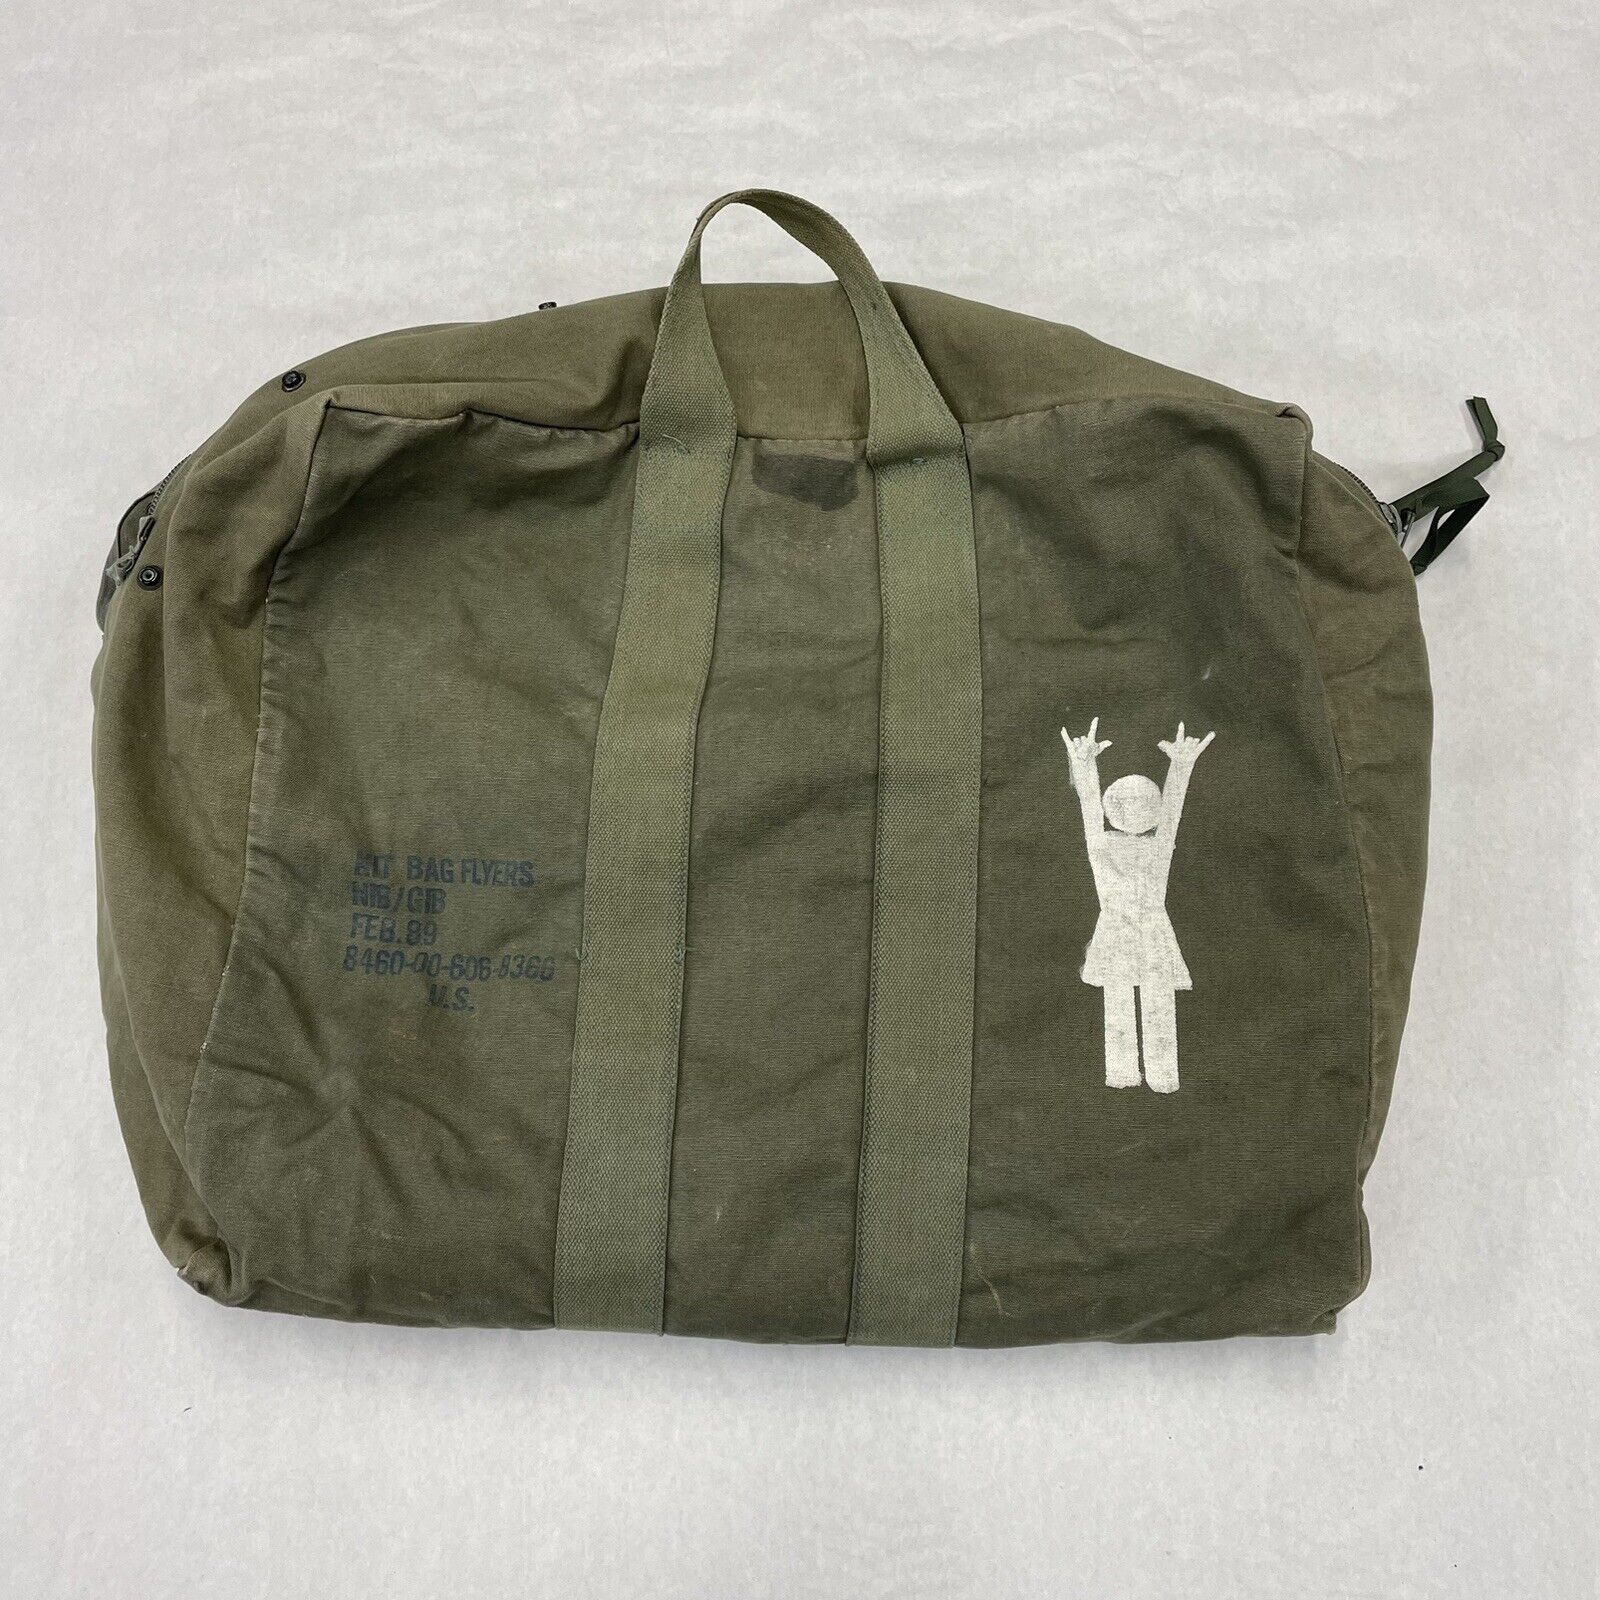 Vtg 1989 USAF Flyer's Kit Bag Canvas Duffle 80s US Army military Art painting